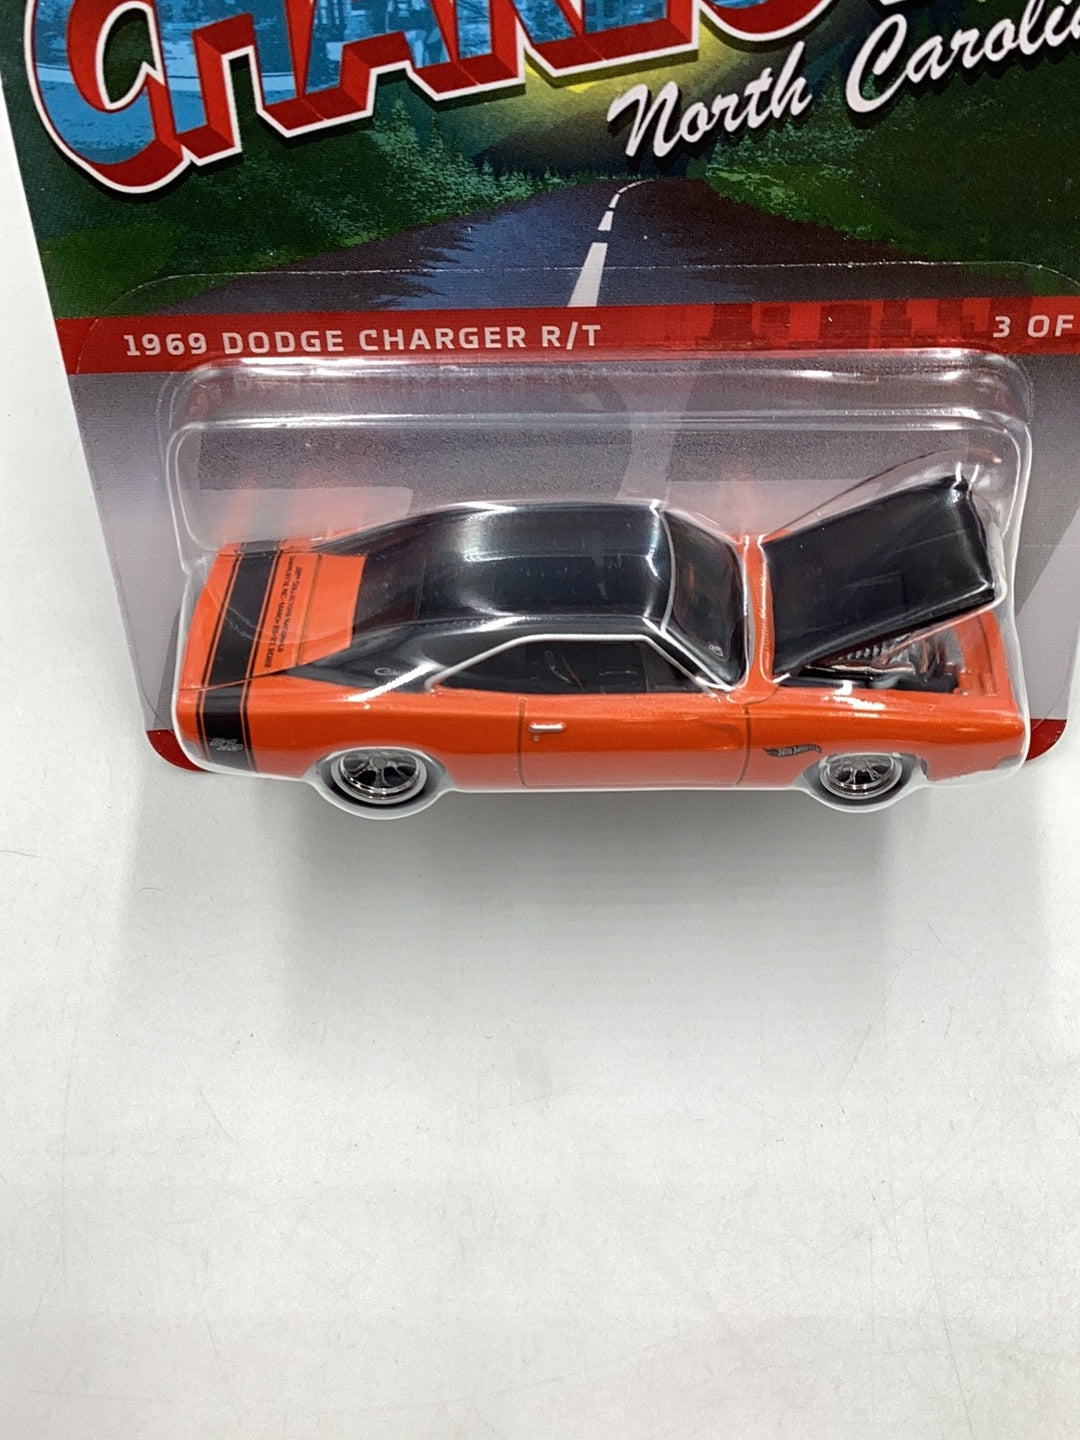 Hot wheels 22nd annual collectors Nationals Finale Car 1969 Dodge Charger R/T #3845/4000 with protector